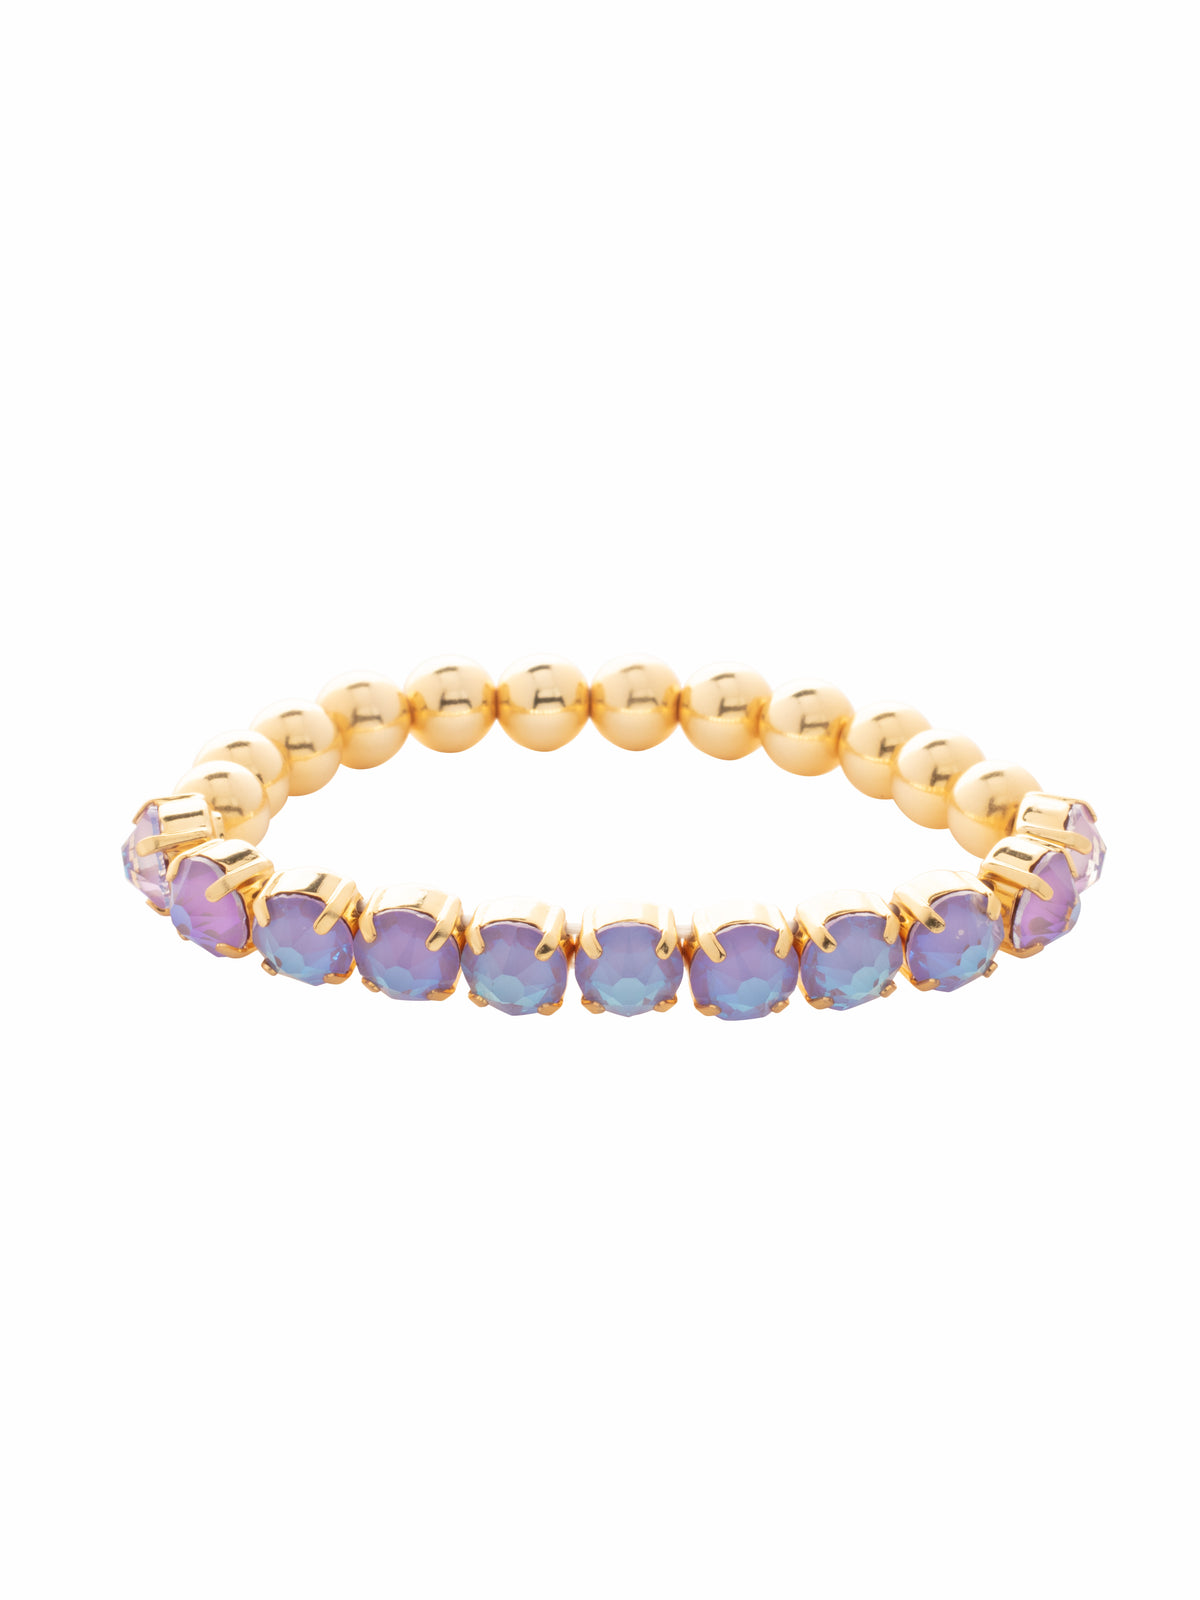 Crystal Zola Stretch Bracelet - 4BFJ40BGLVD - <p>Crystal Zola Stretch Bracelet features a side of repeating metal beads and a side of round cut crystals on a multi-layered stretchy jewelry filament, creating a durable and trendy piece. From Sorrelli's Lavender Delite collection in our Bright Gold-tone finish.</p>